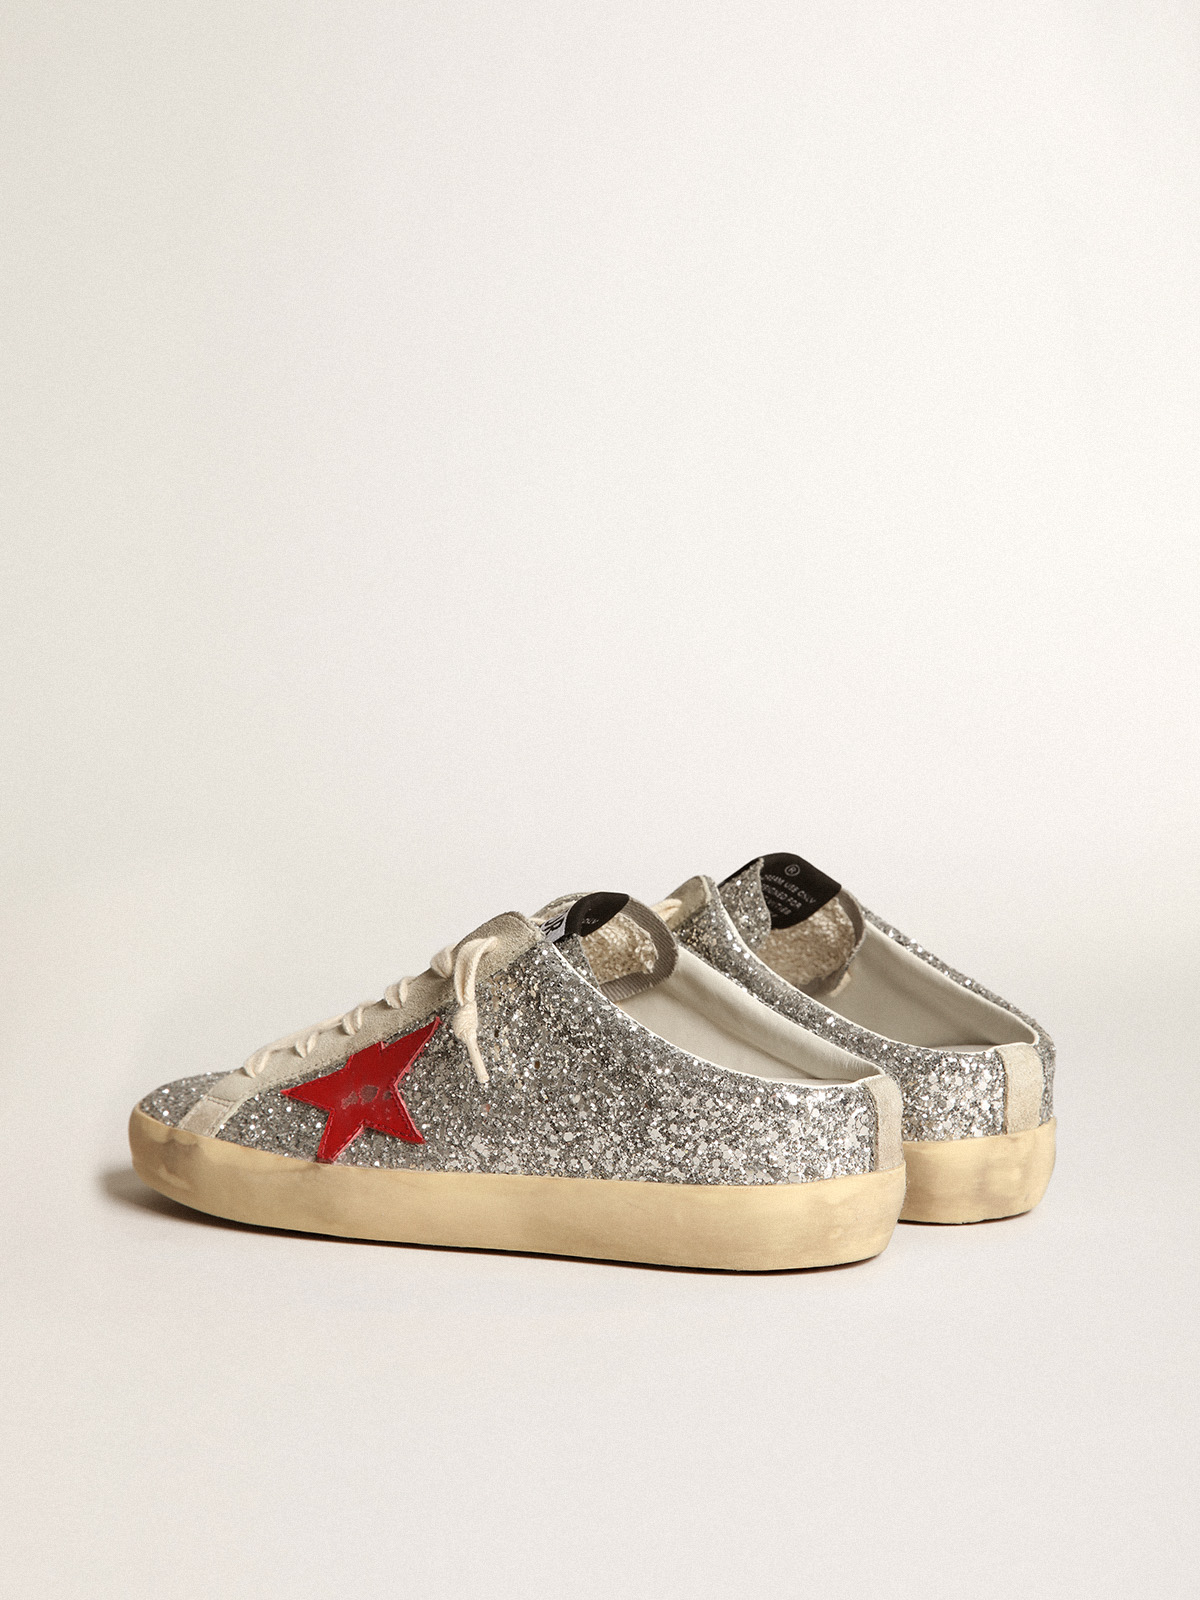 Women's Super-Star Sabot in silver glitter with red leather star